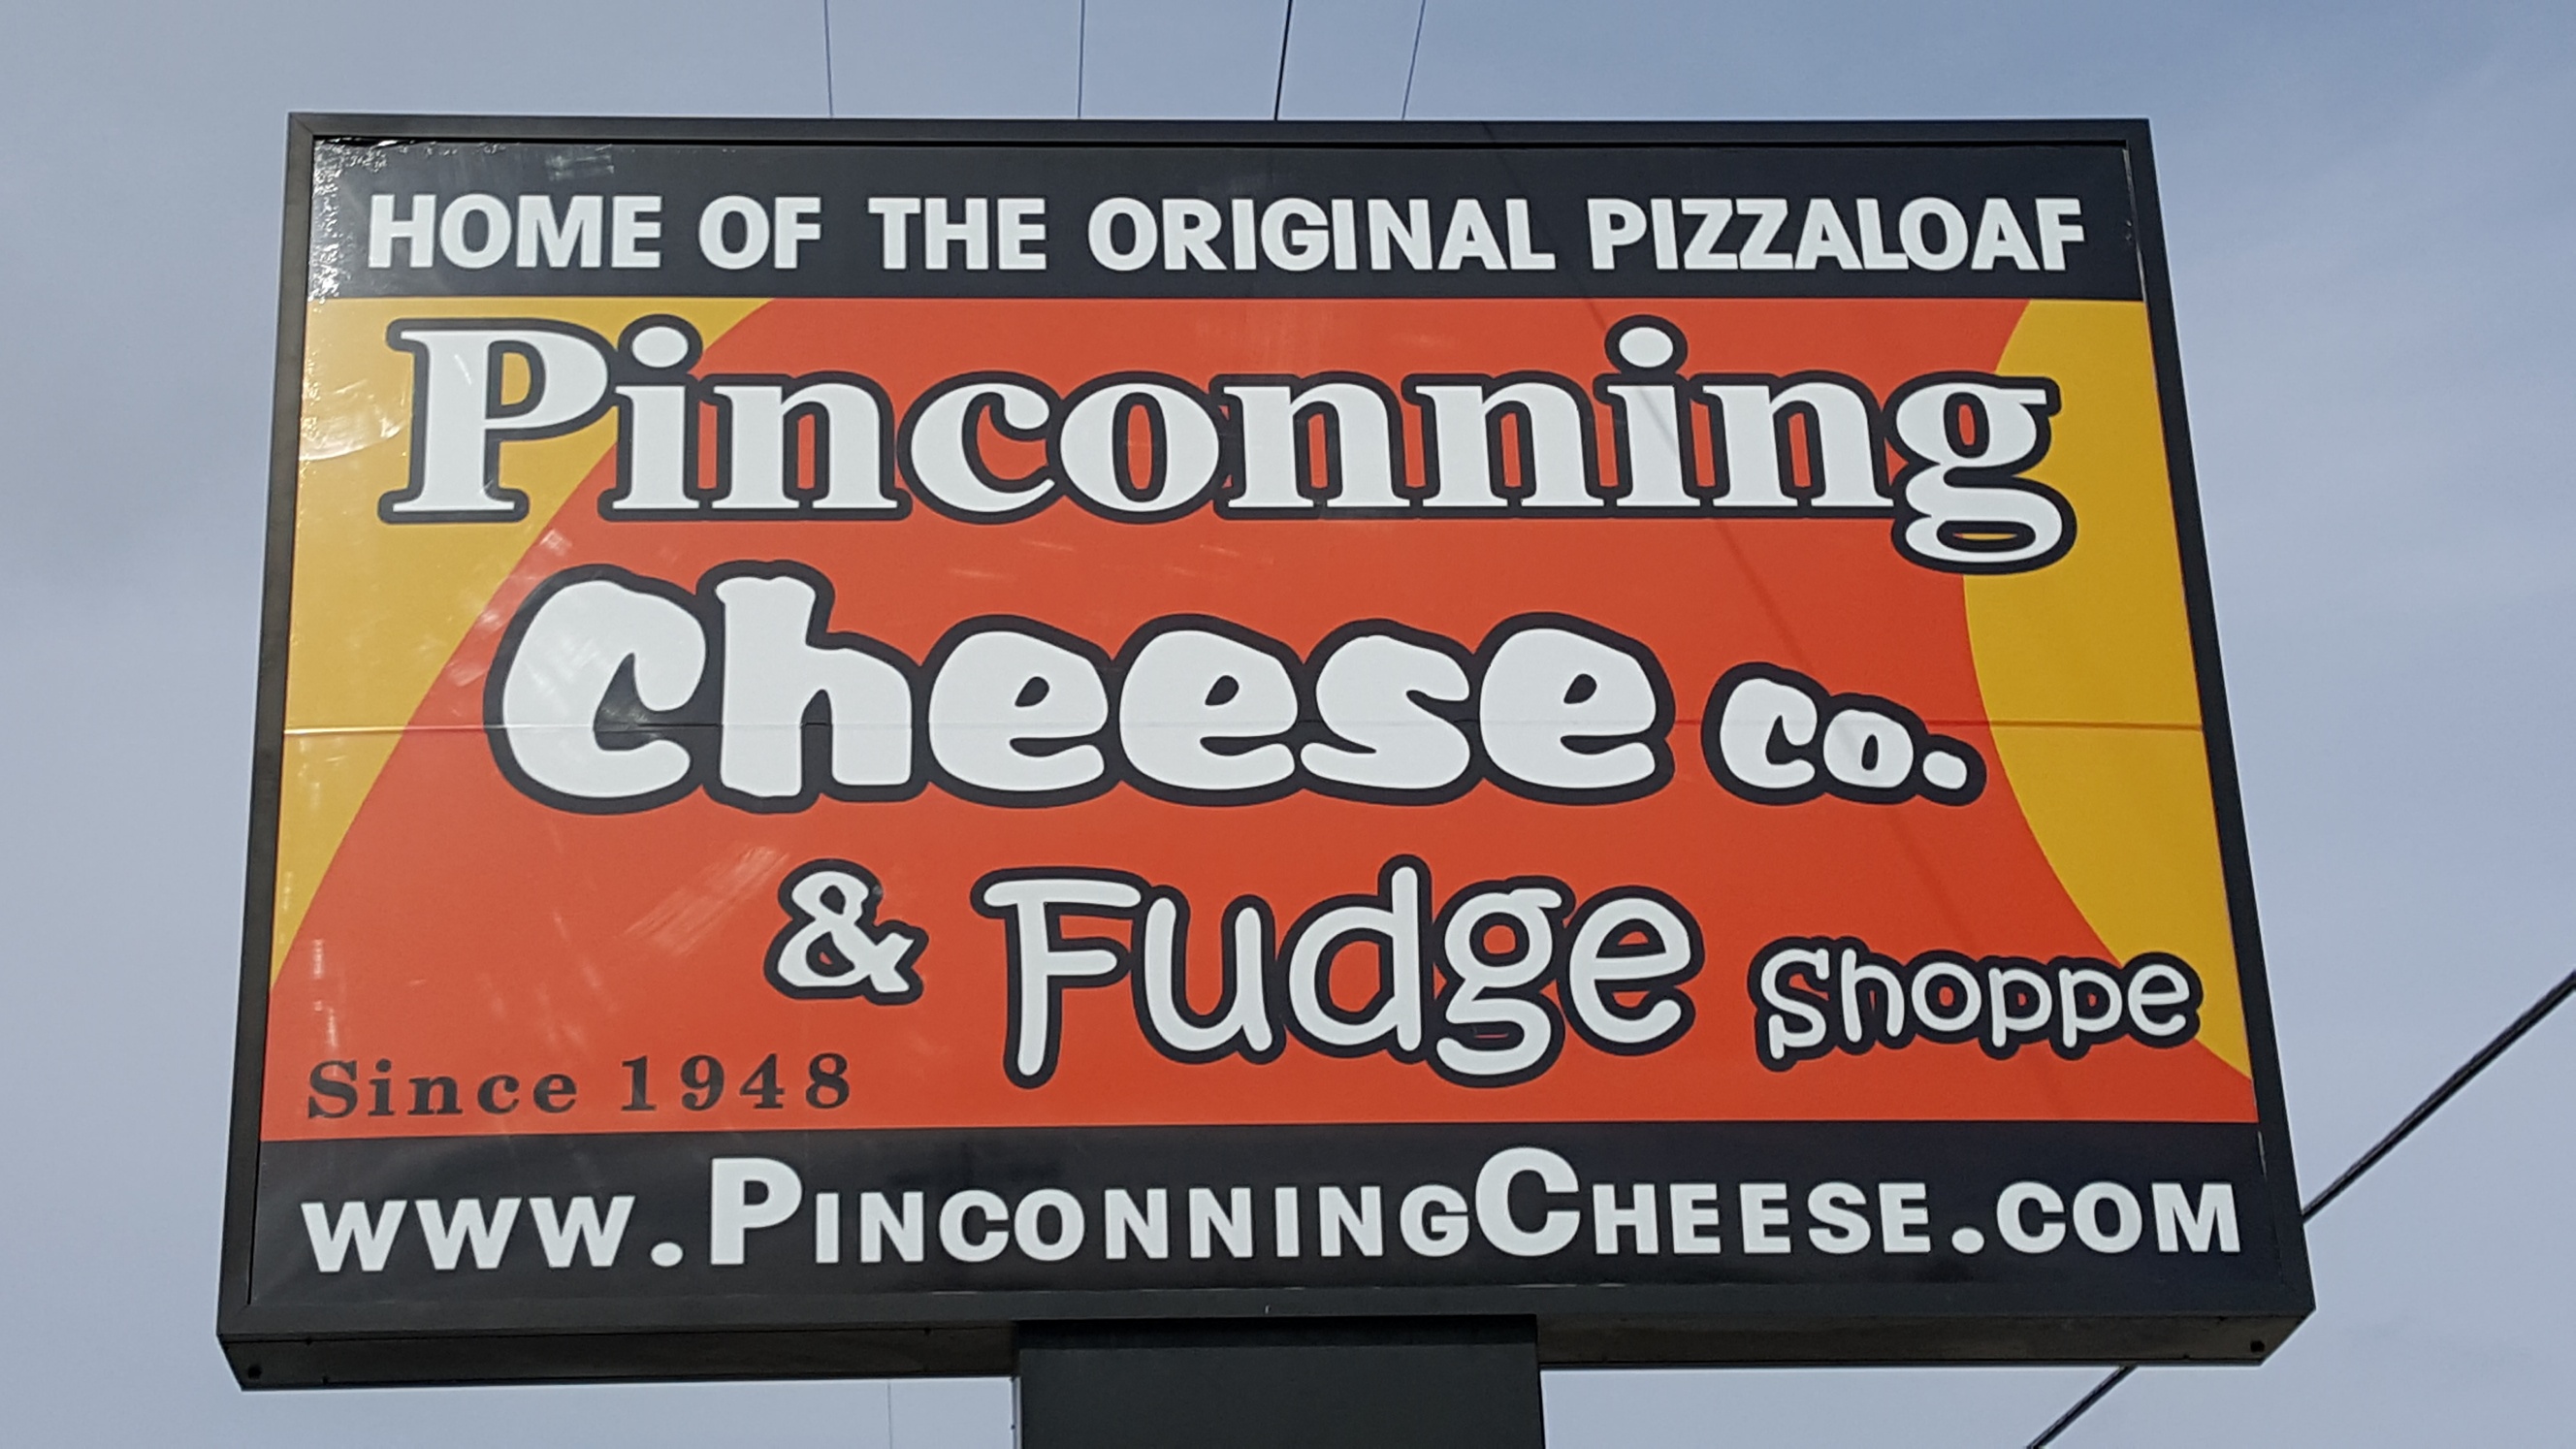 The Cheese House  City of Pinconning